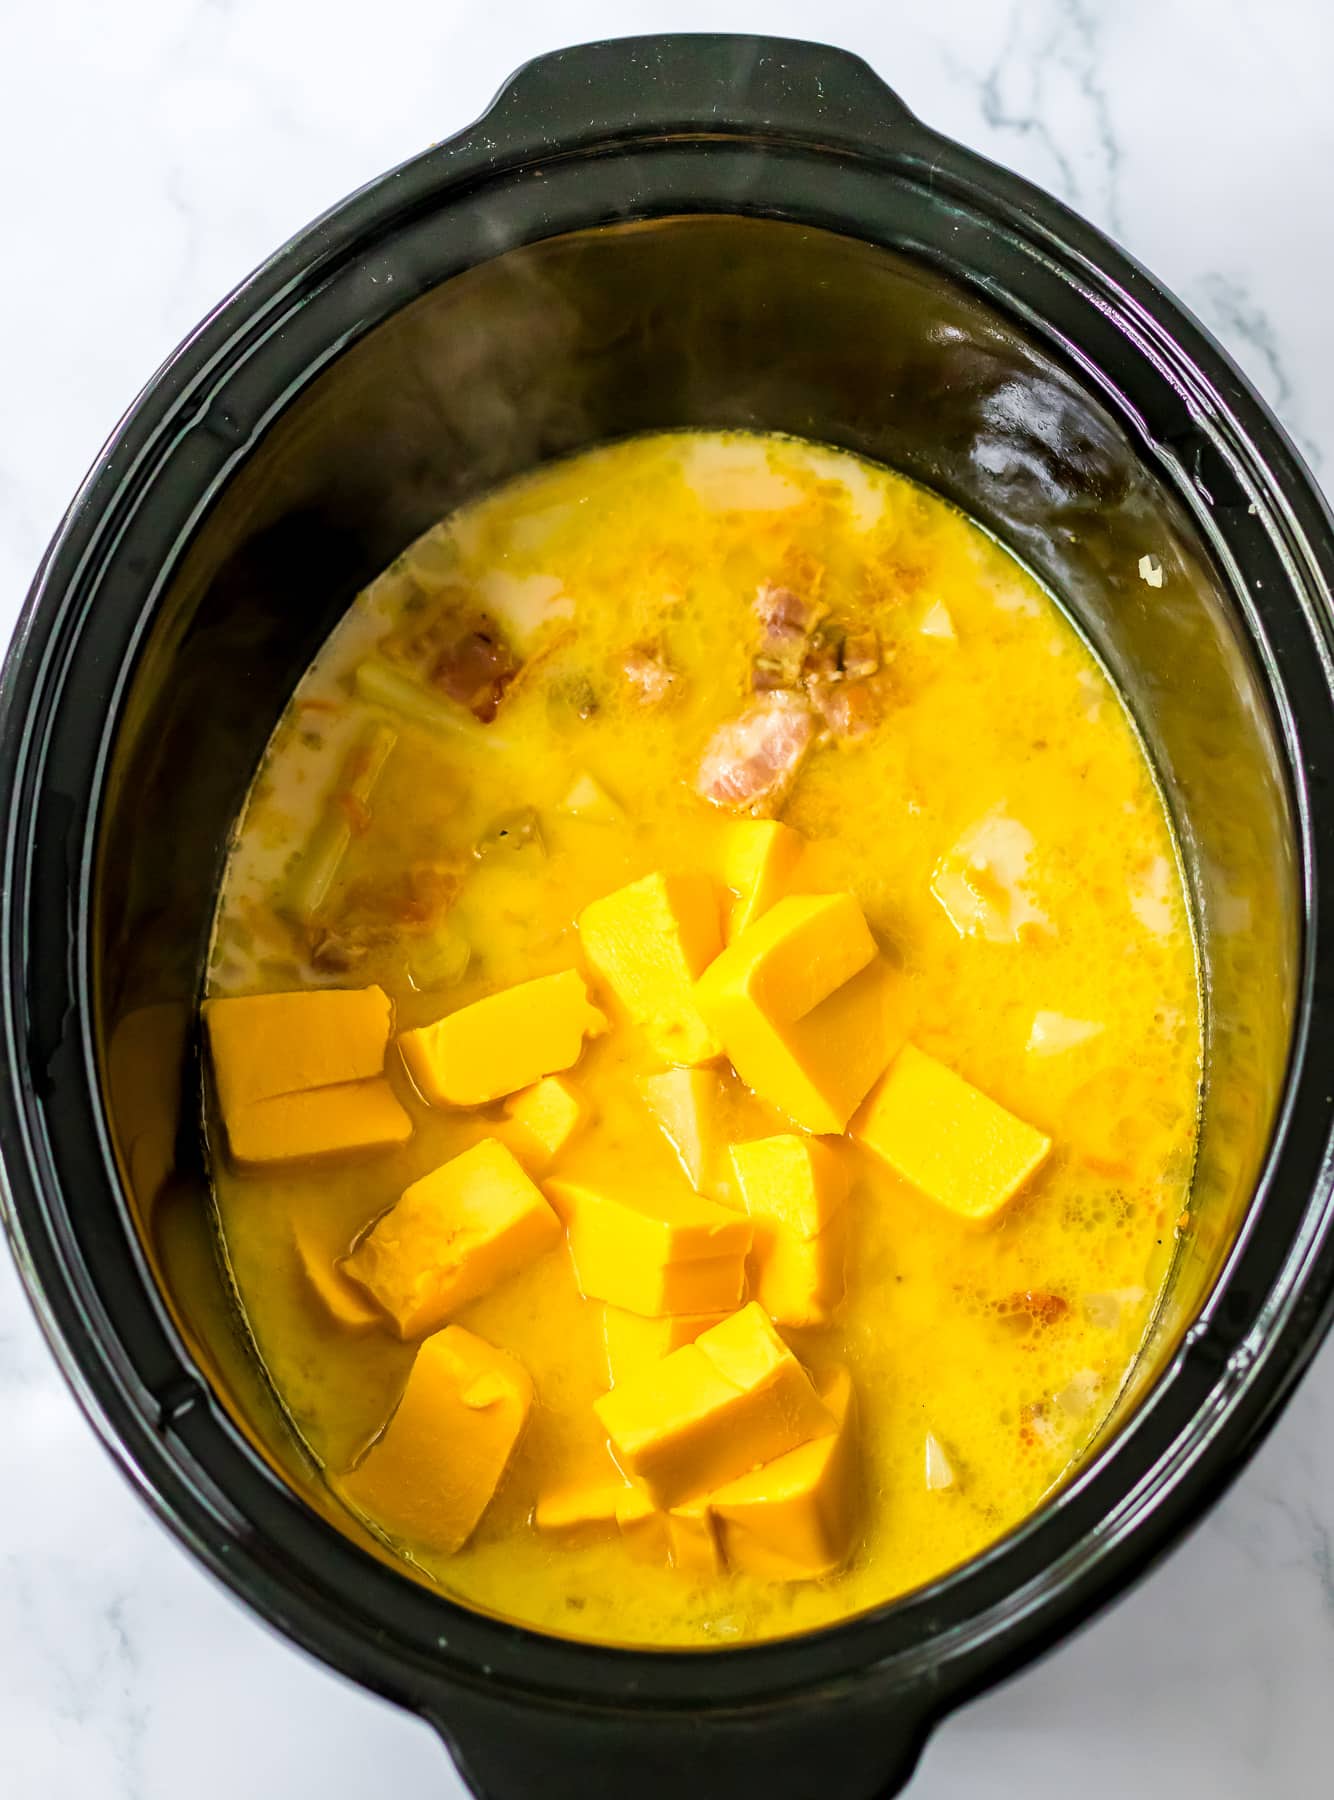 A crock pot filled with mashed potatoes and cubes of cheese.